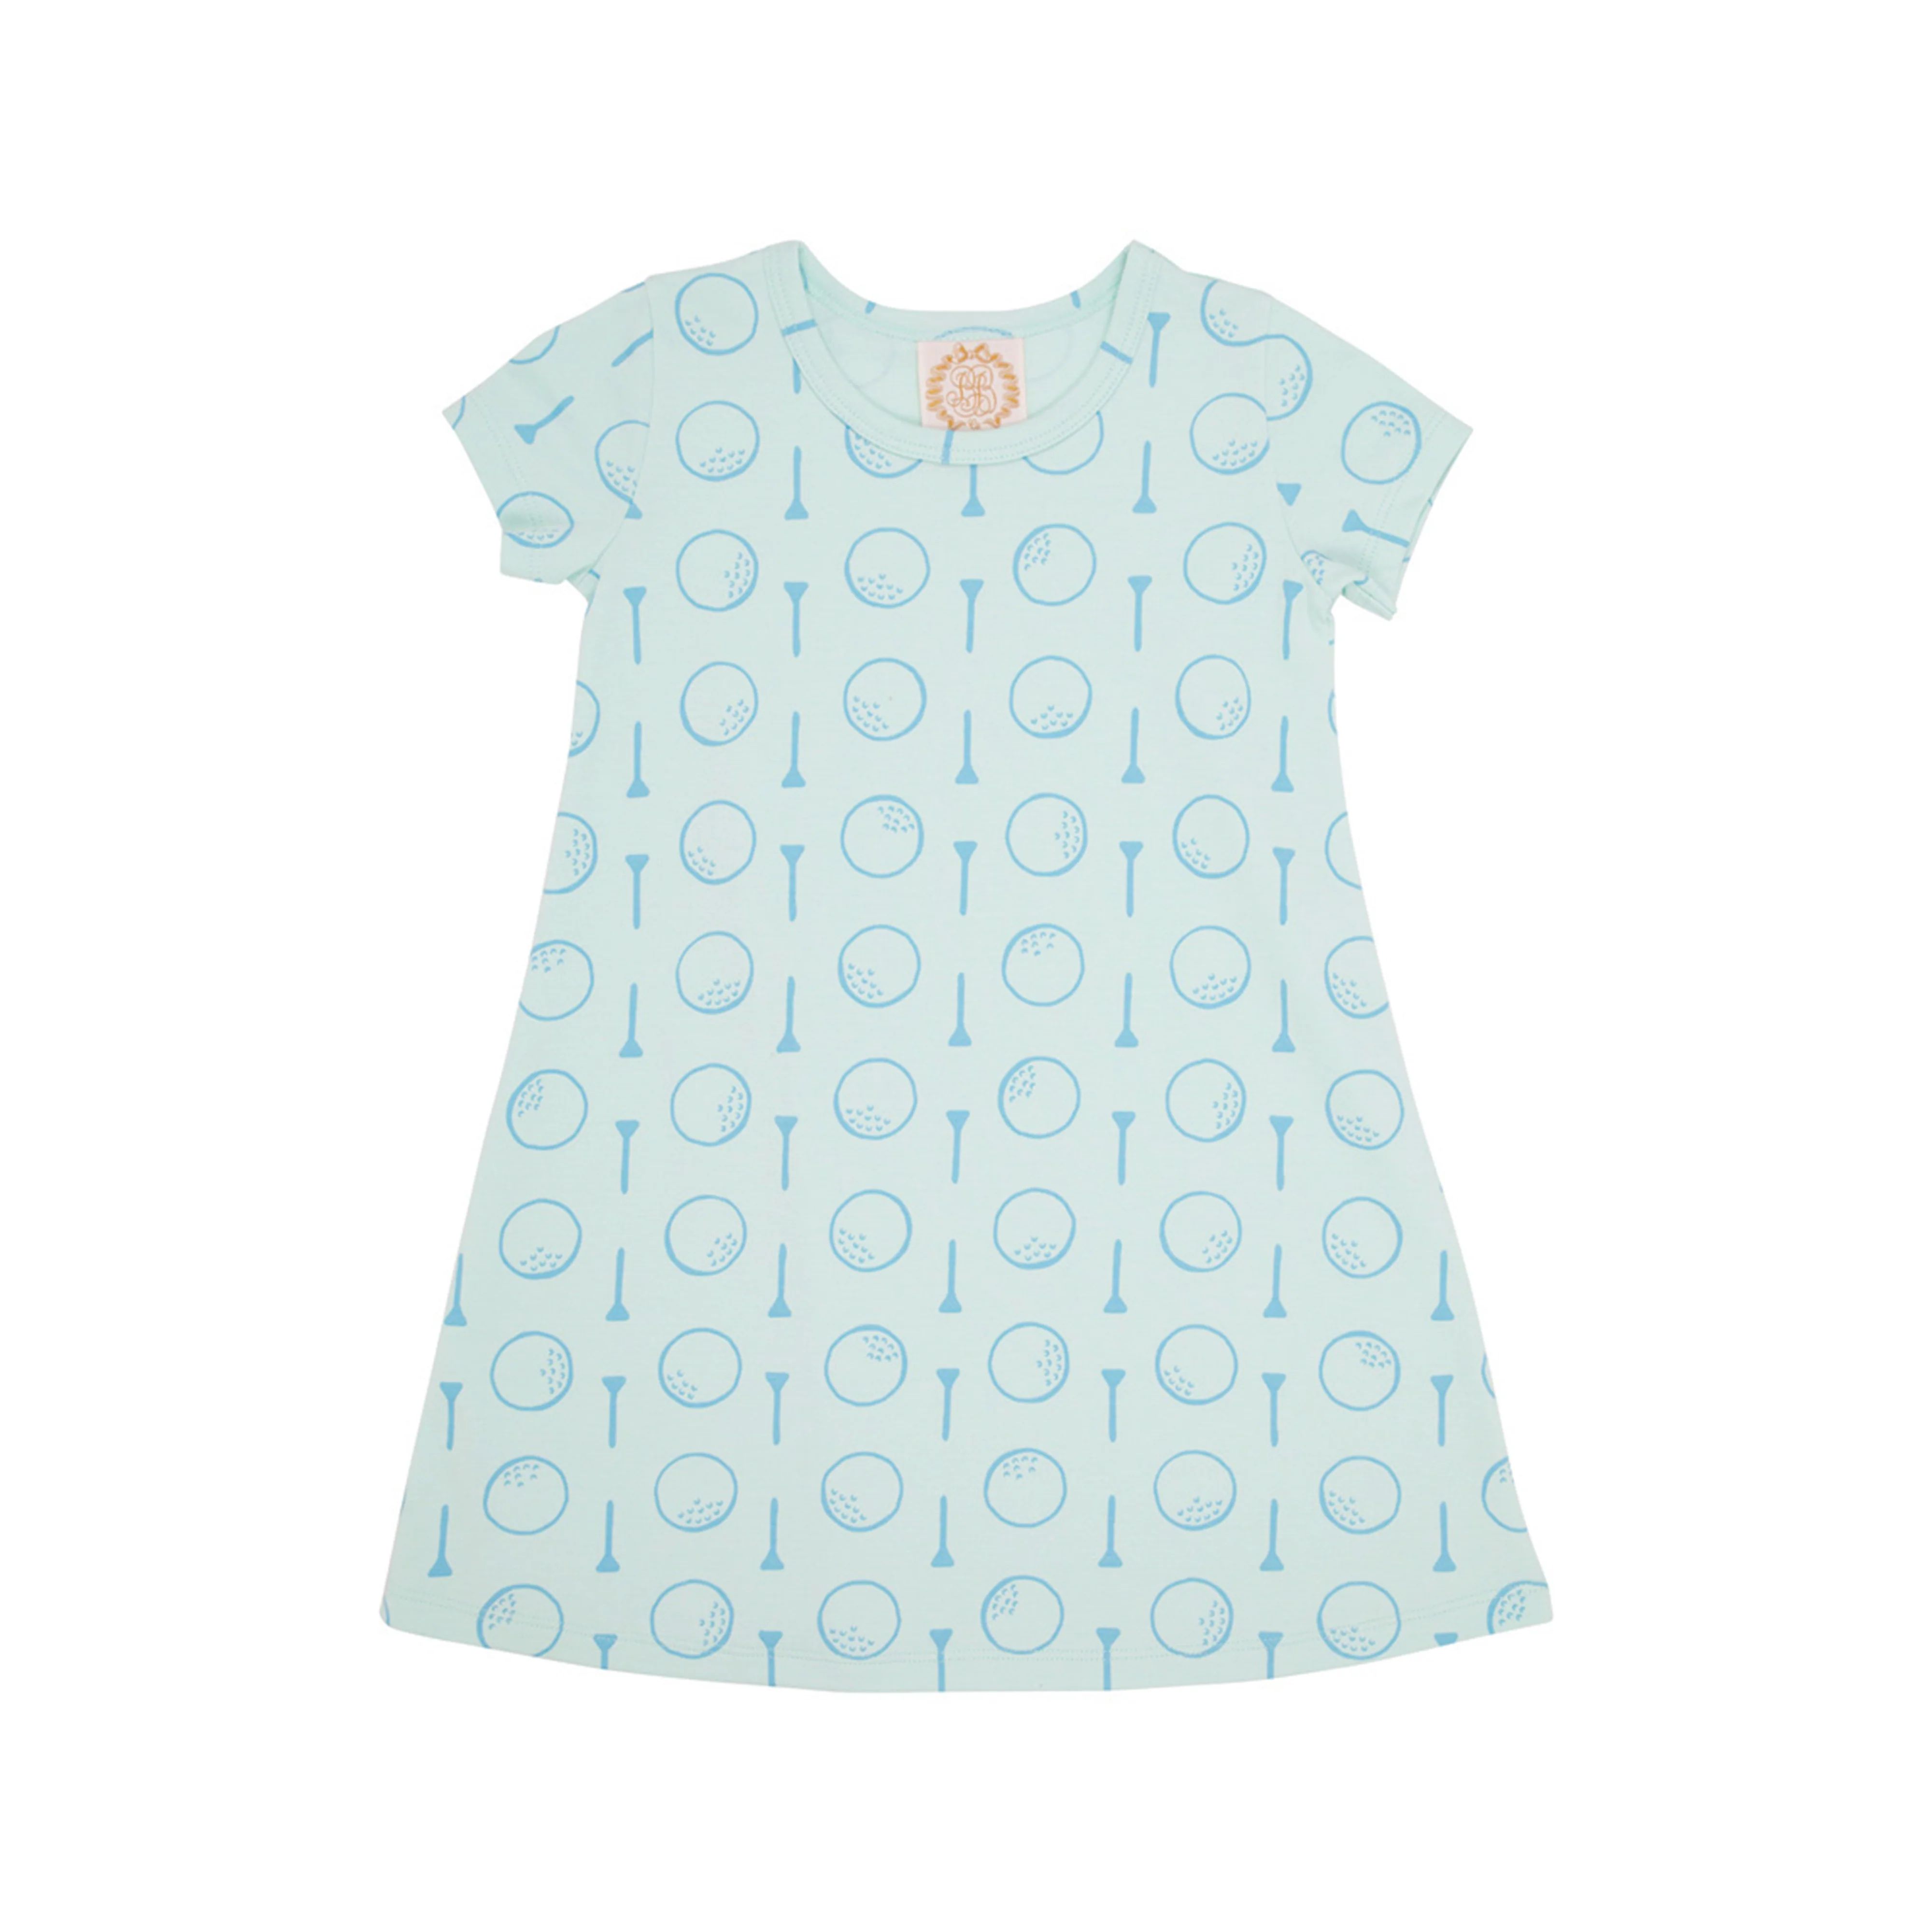 Polly Play Dress - You're Tee-rific | The Beaufort Bonnet Company